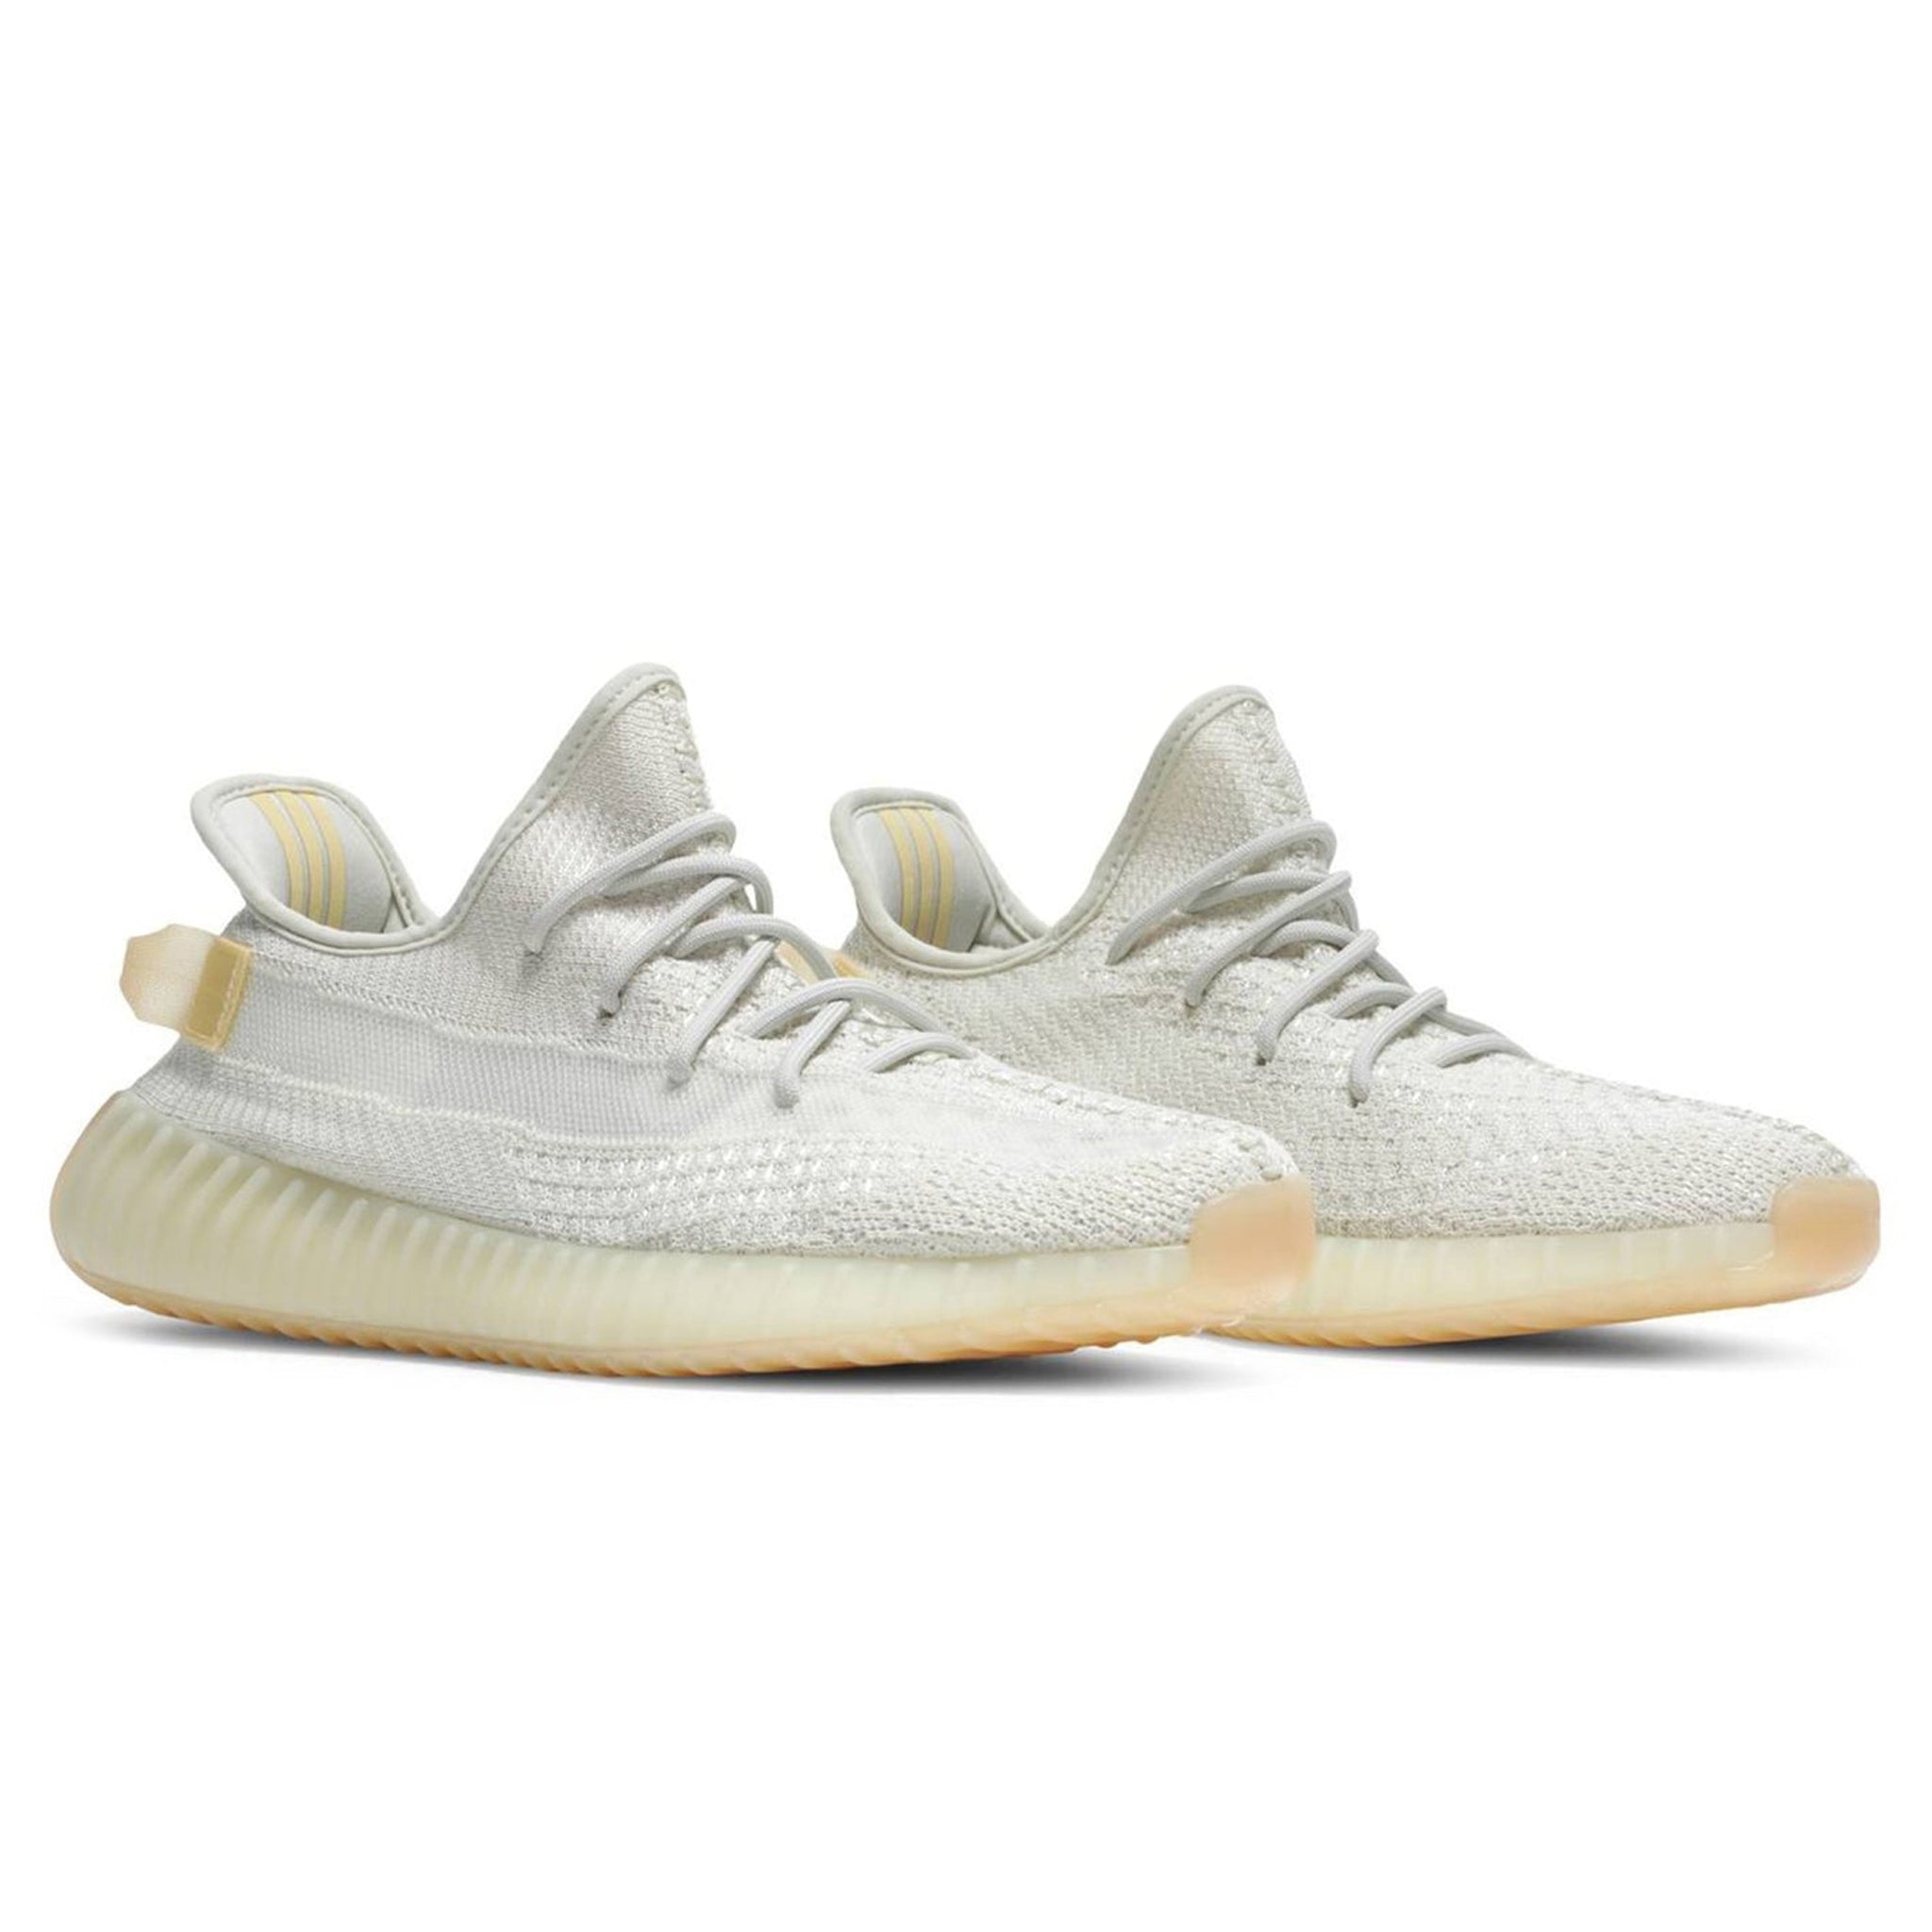 Front side view of Adidas Yeezy Boost 350 V2 Light GY3438